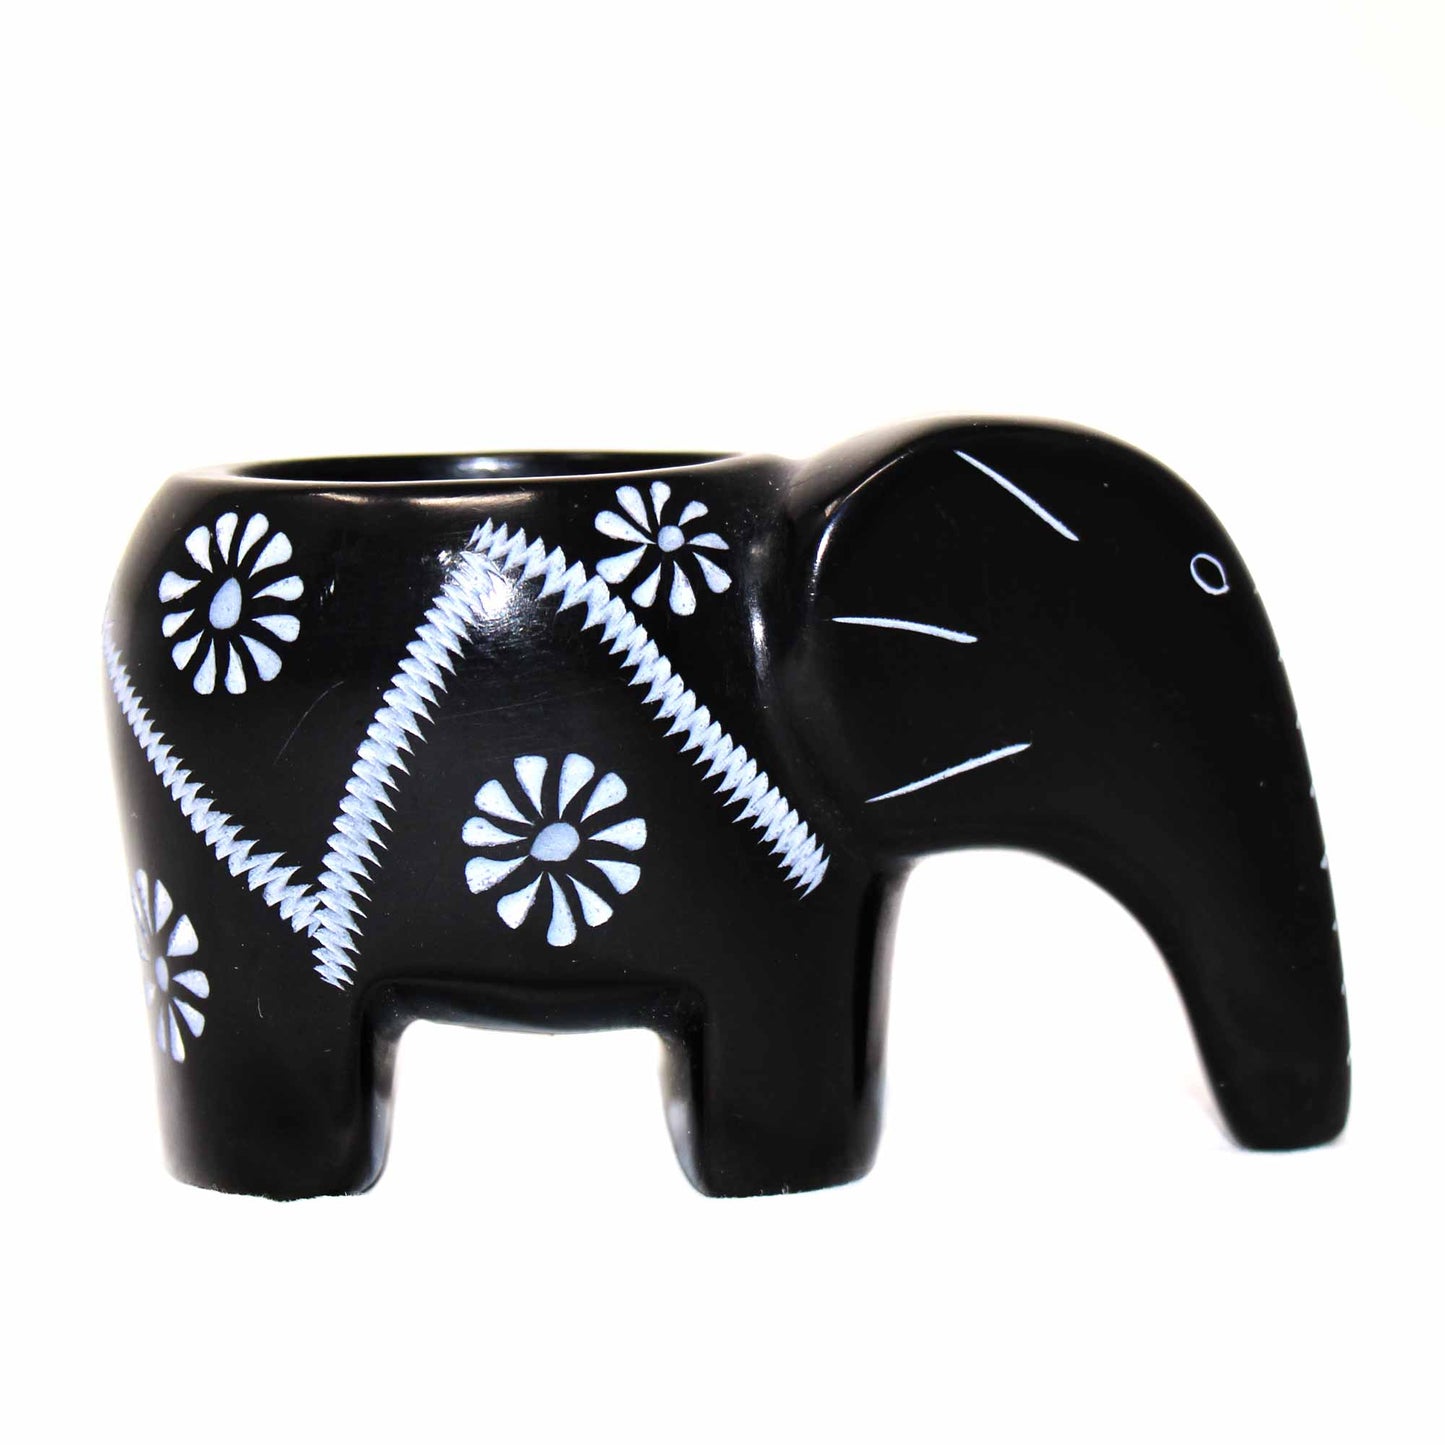 Lucky Elephant Soapstone Tea Light; Black Finish with Etched Design 4"l x  2.5"t x 1.75"w